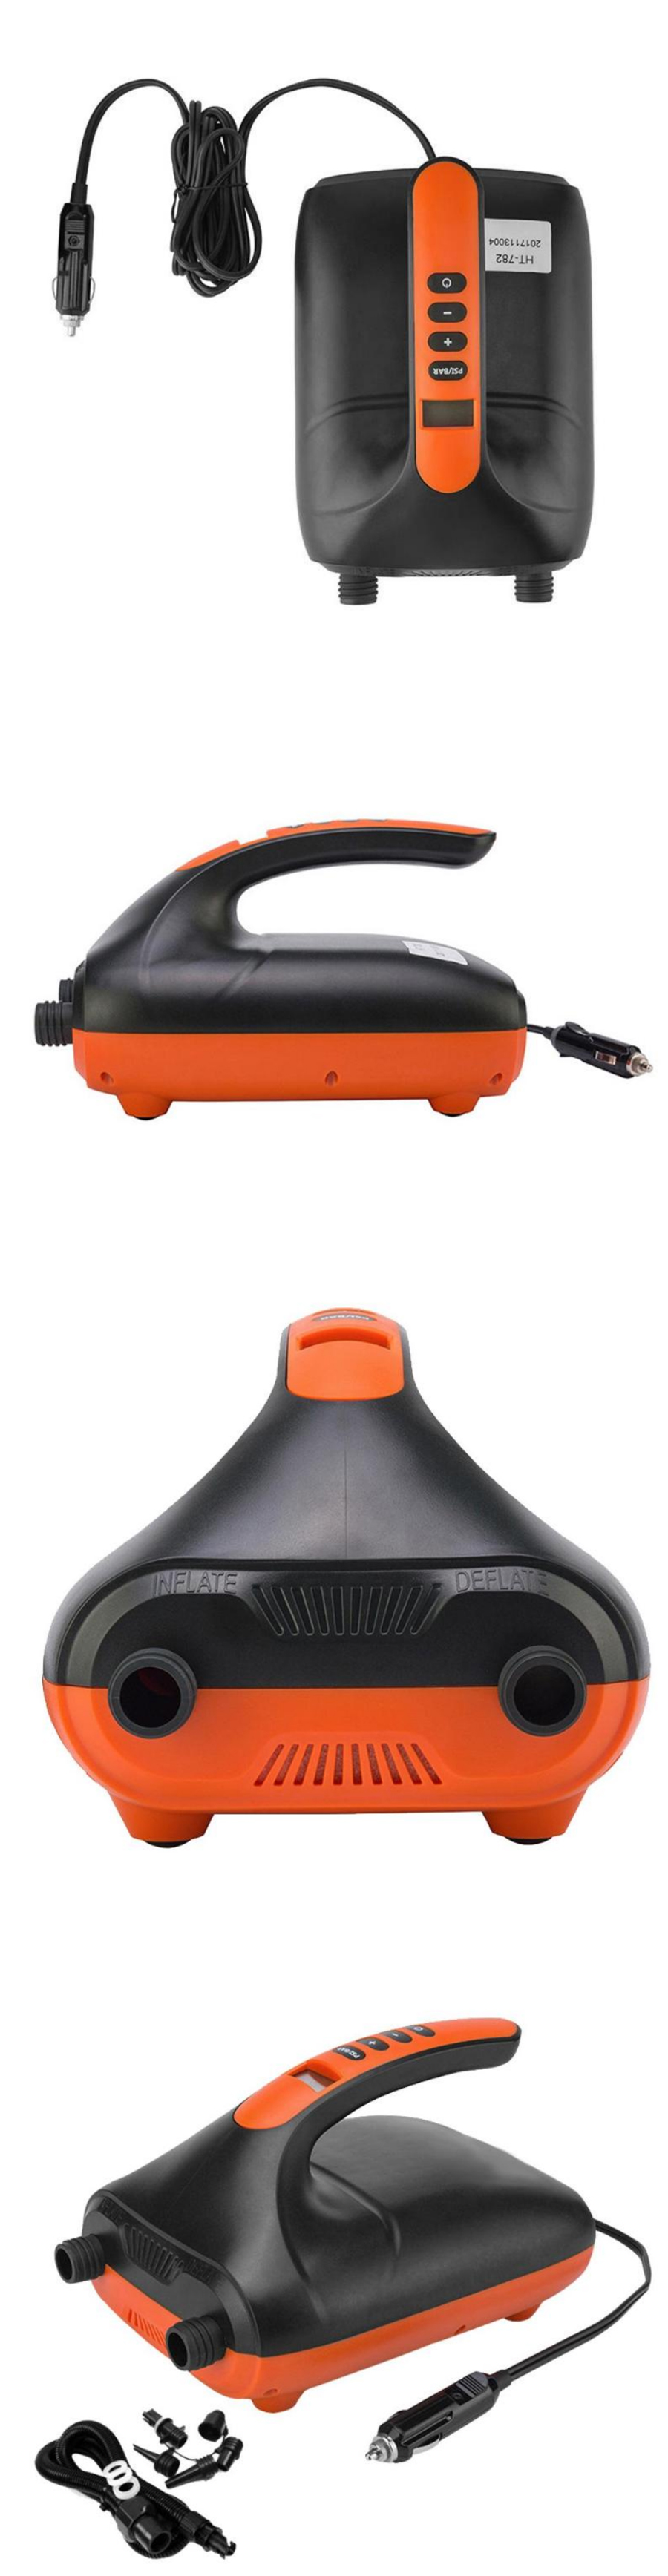 12V-20PSI-SUP-Electric-SUP-Inflatable-Air-Pump-Compressor-Lightweight-Outdoor-Water-Sports-Surfing-S-1718647-2